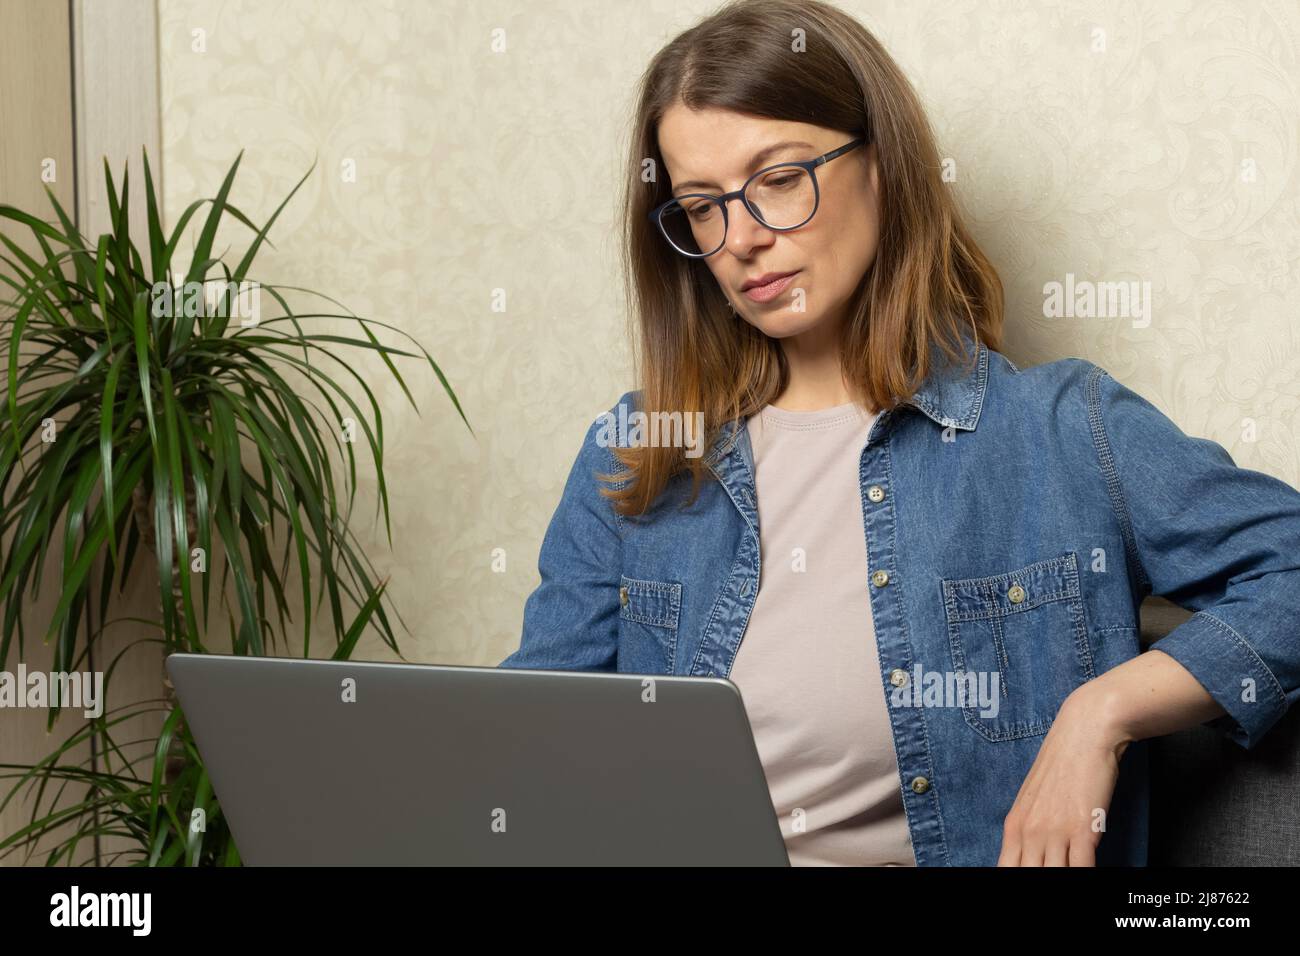 A young woman works on a laptop while sitting on the couch at home. Stock Photo